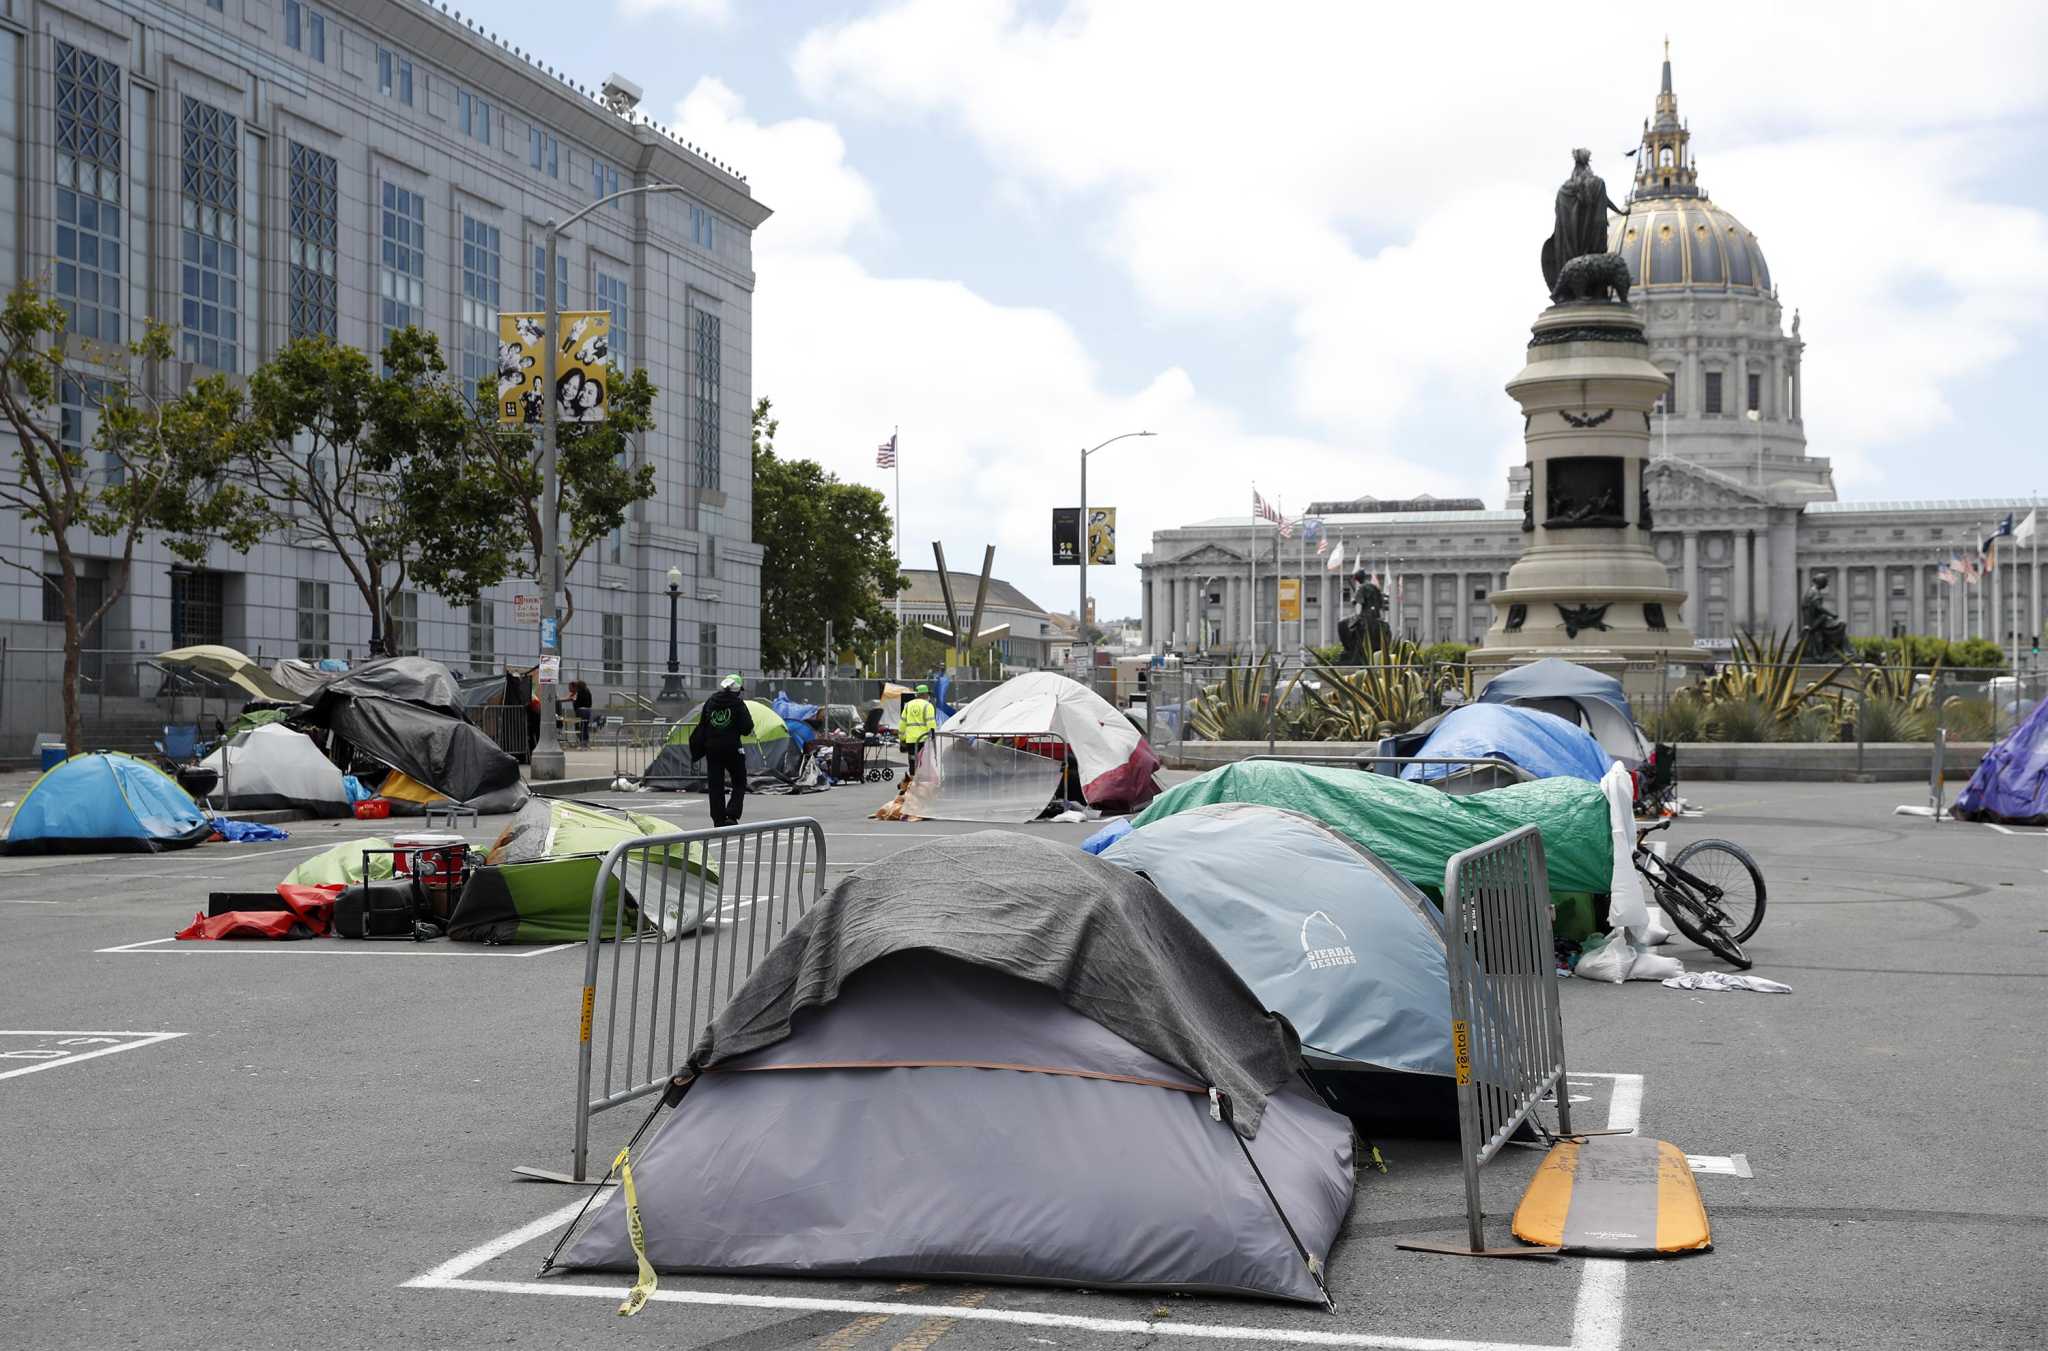 S F Spends More Than K Per Tent At Homeless Sites Now Its Being Asked For Another